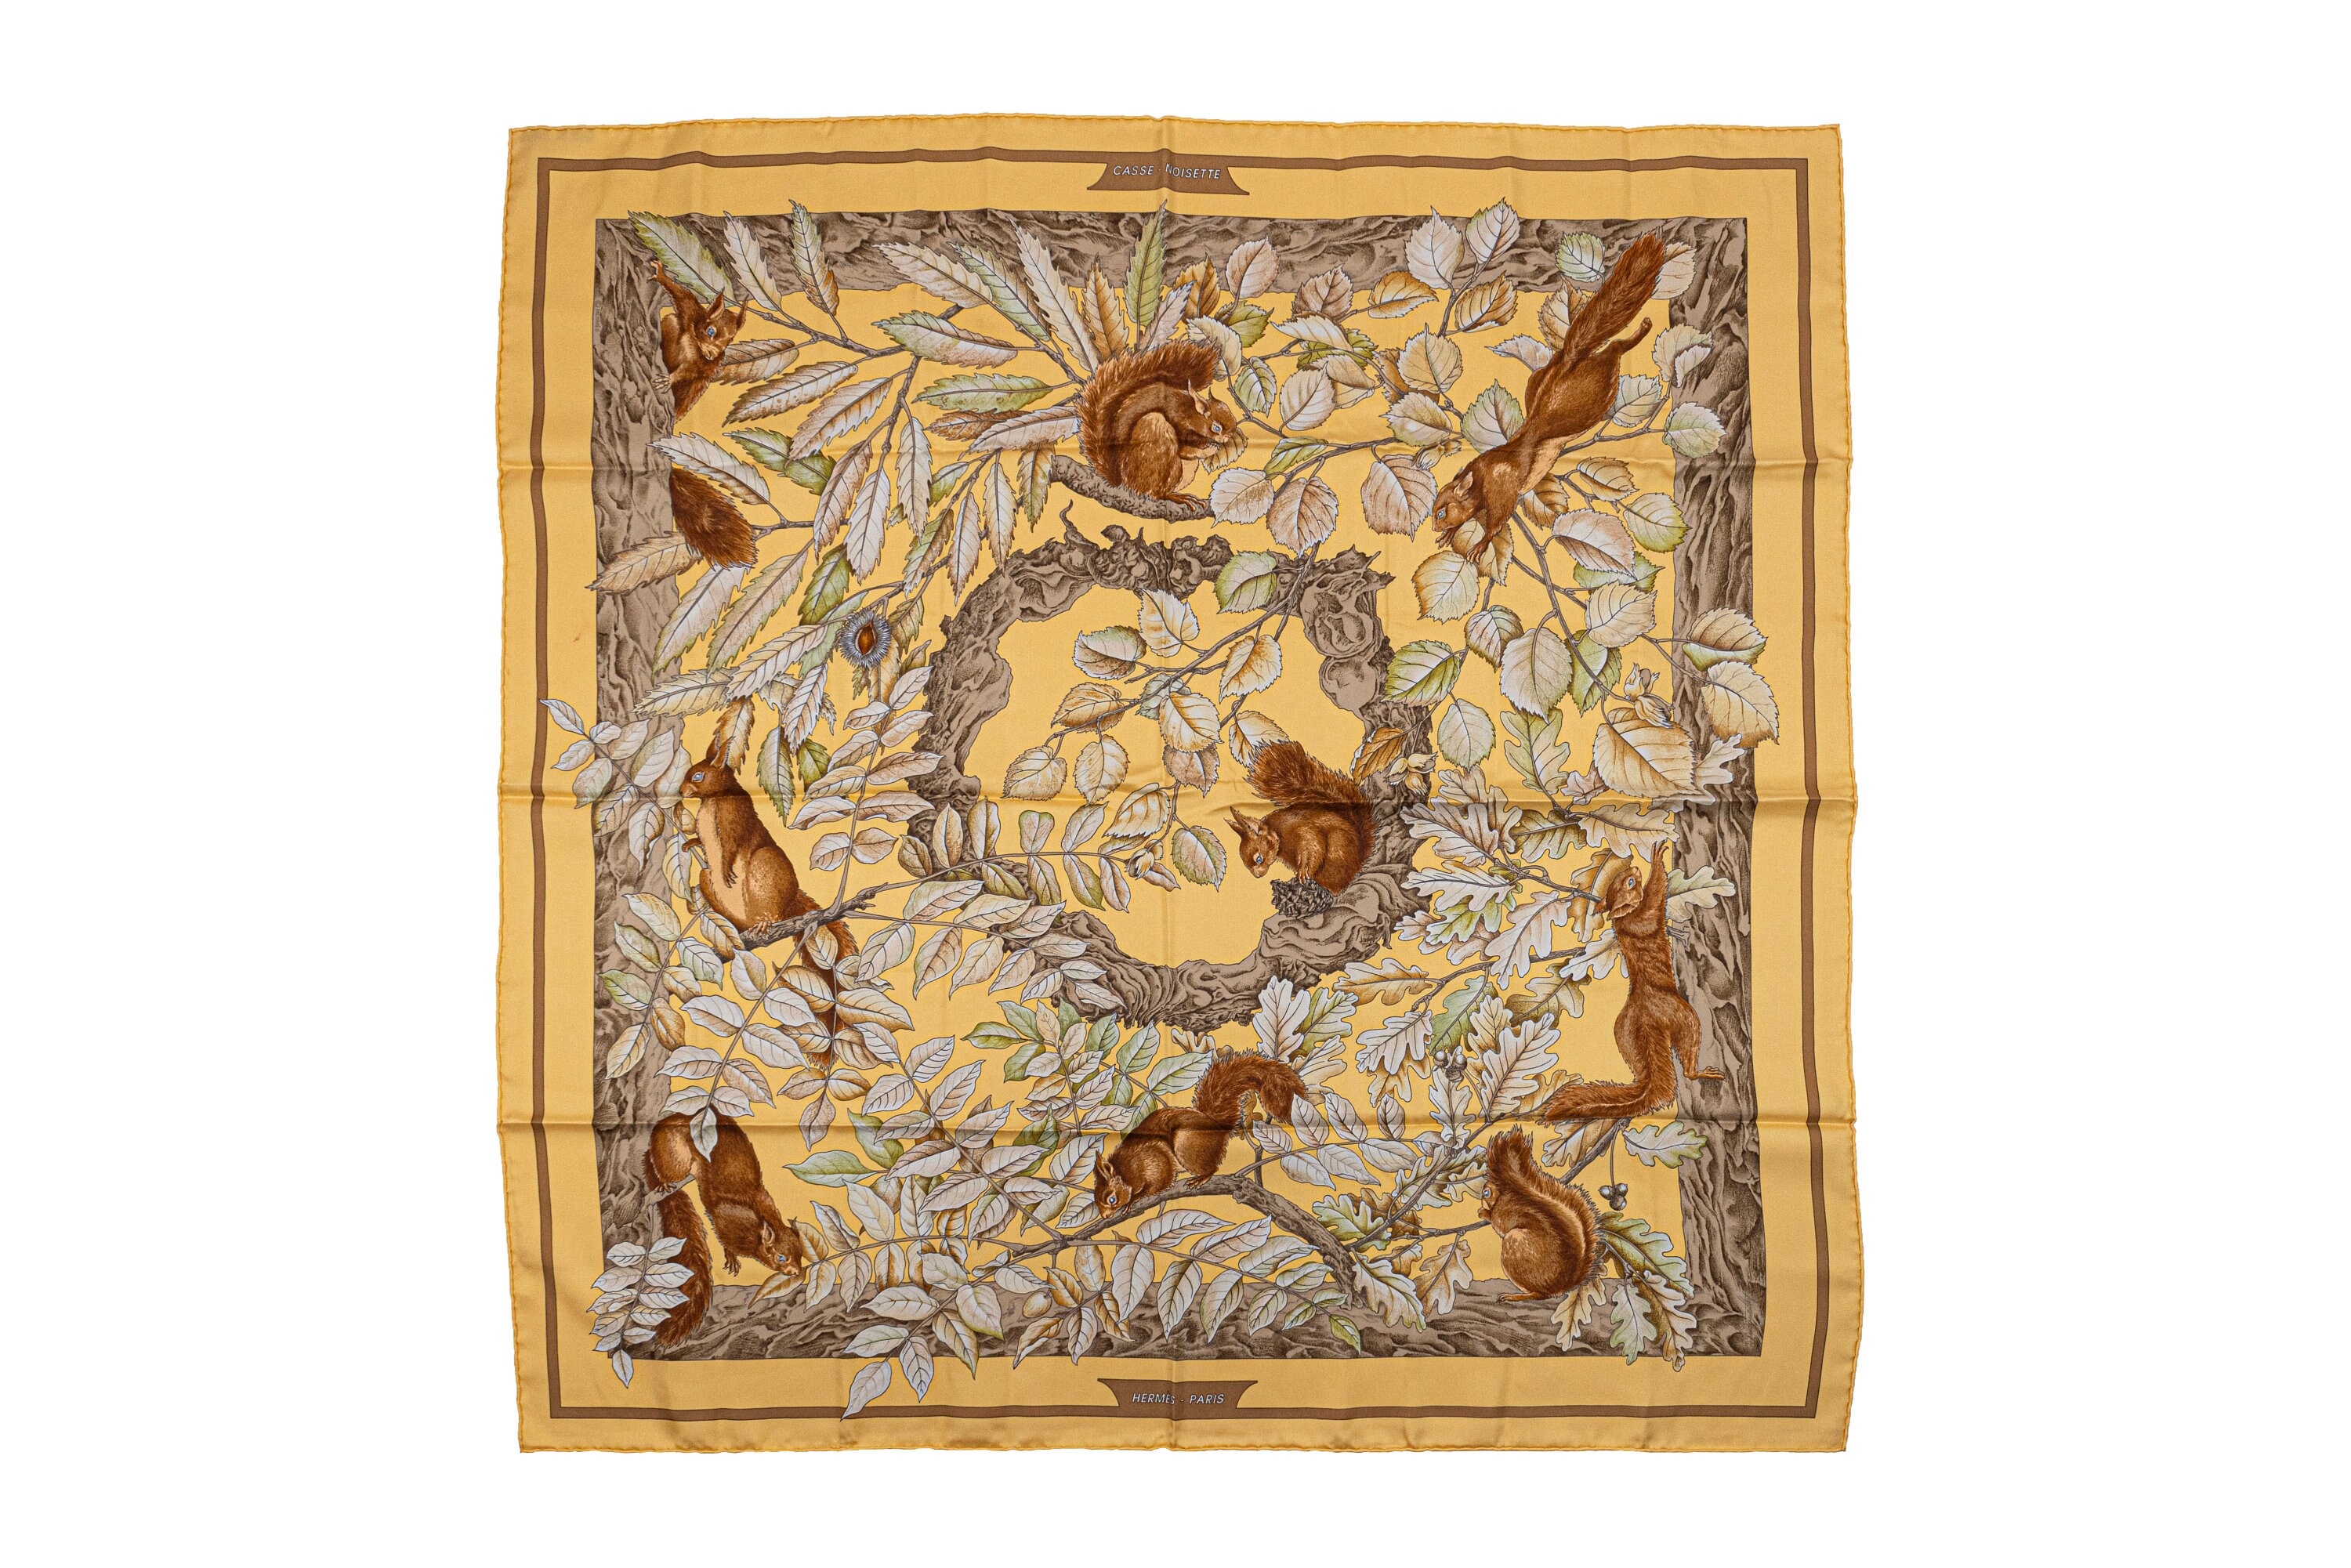 Hermès 1990-2000s pre-owned Eperon d'Or Silk Scarf - Farfetch